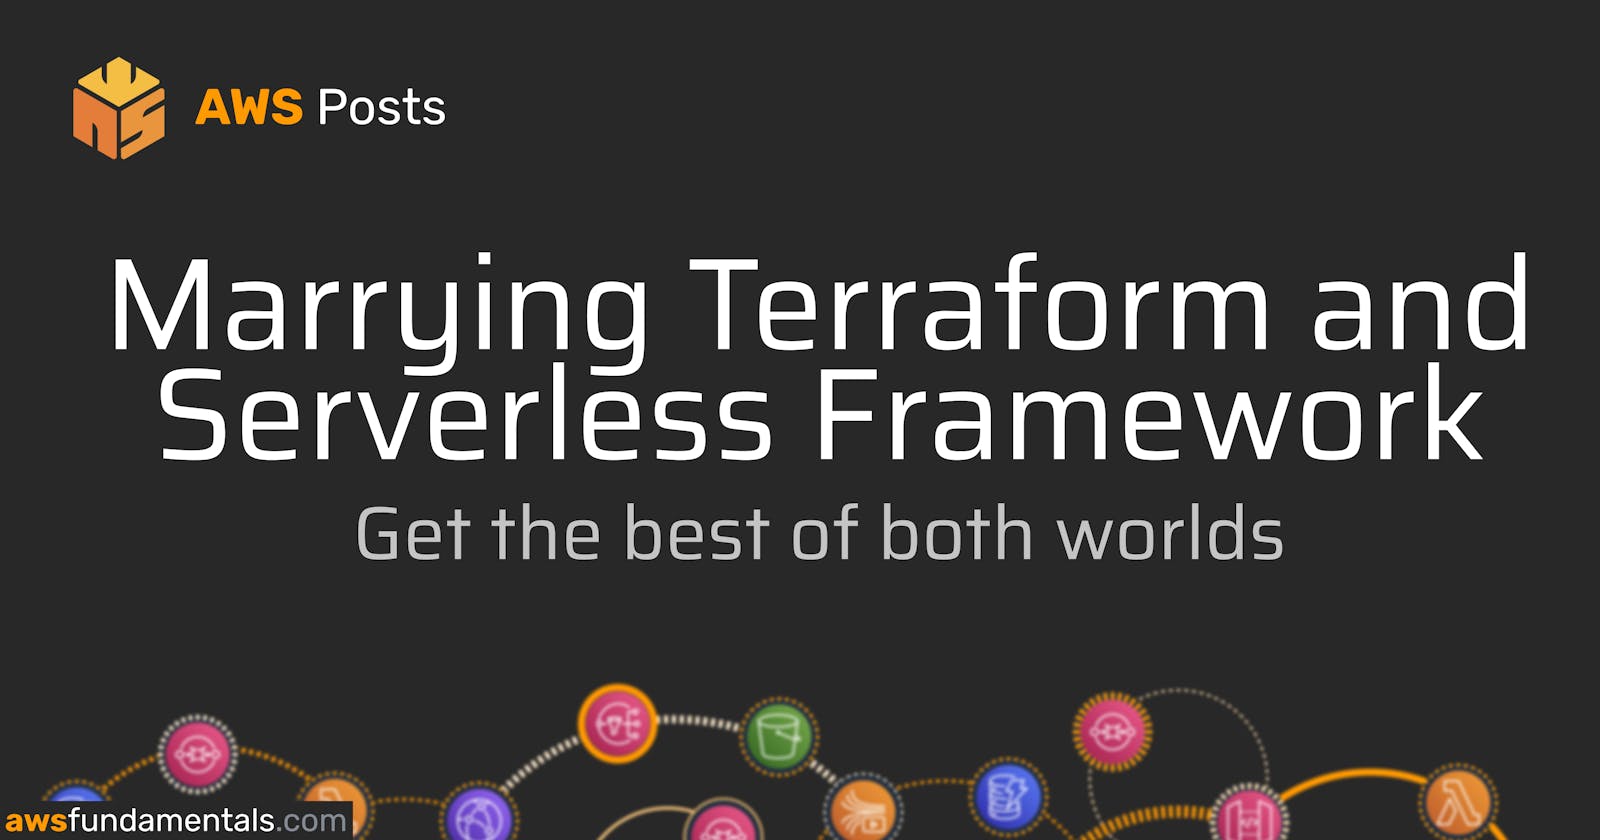 Marrying Terraform and Serverless Framework by Using the Parameter Store